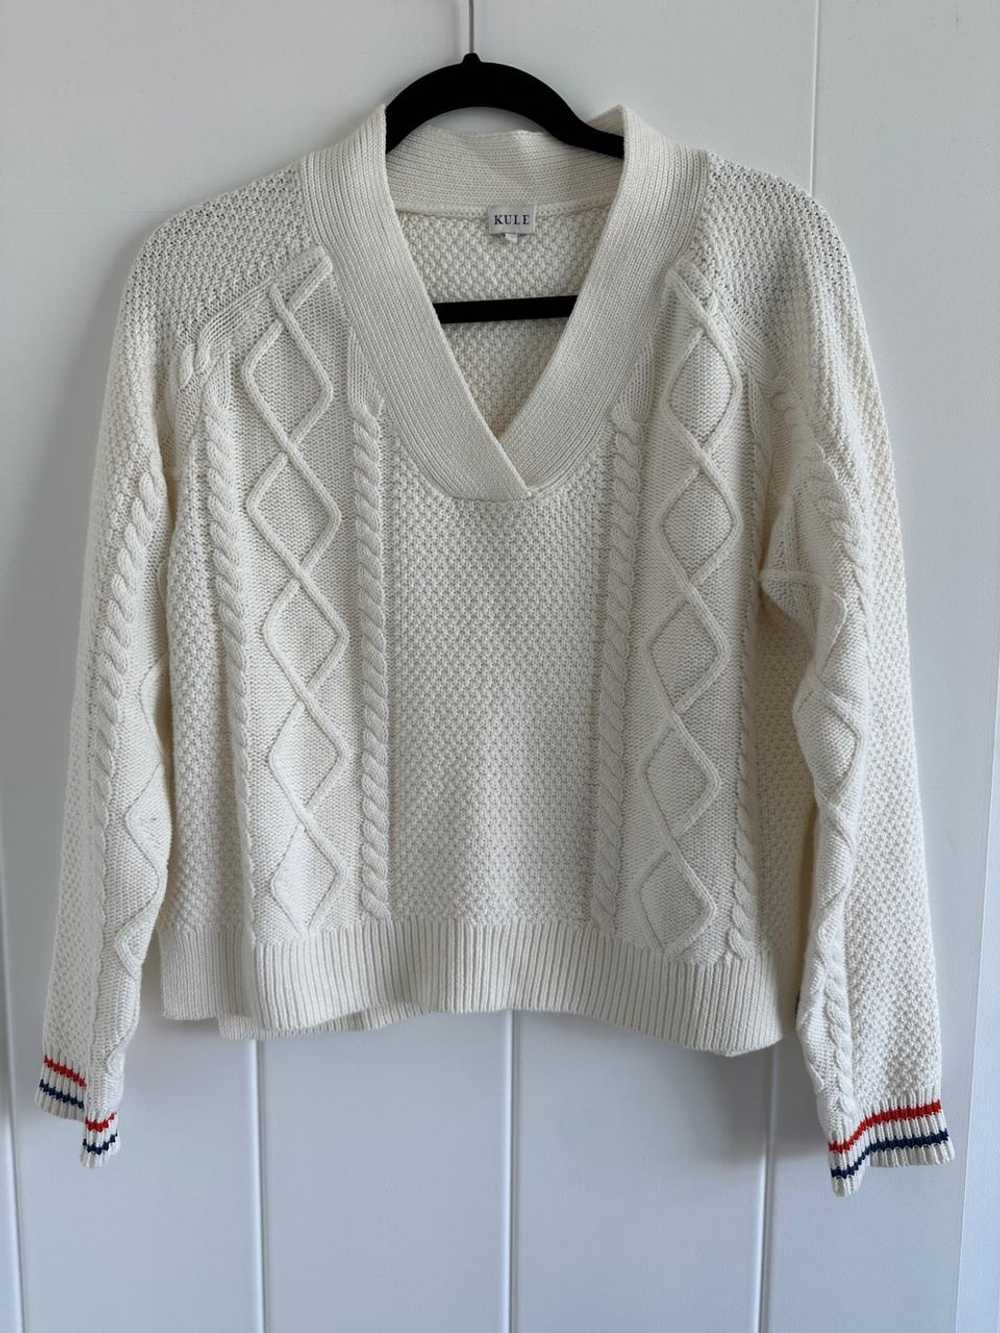 KULE Cable knit sweater (XS) | Used, Secondhand,… - image 1